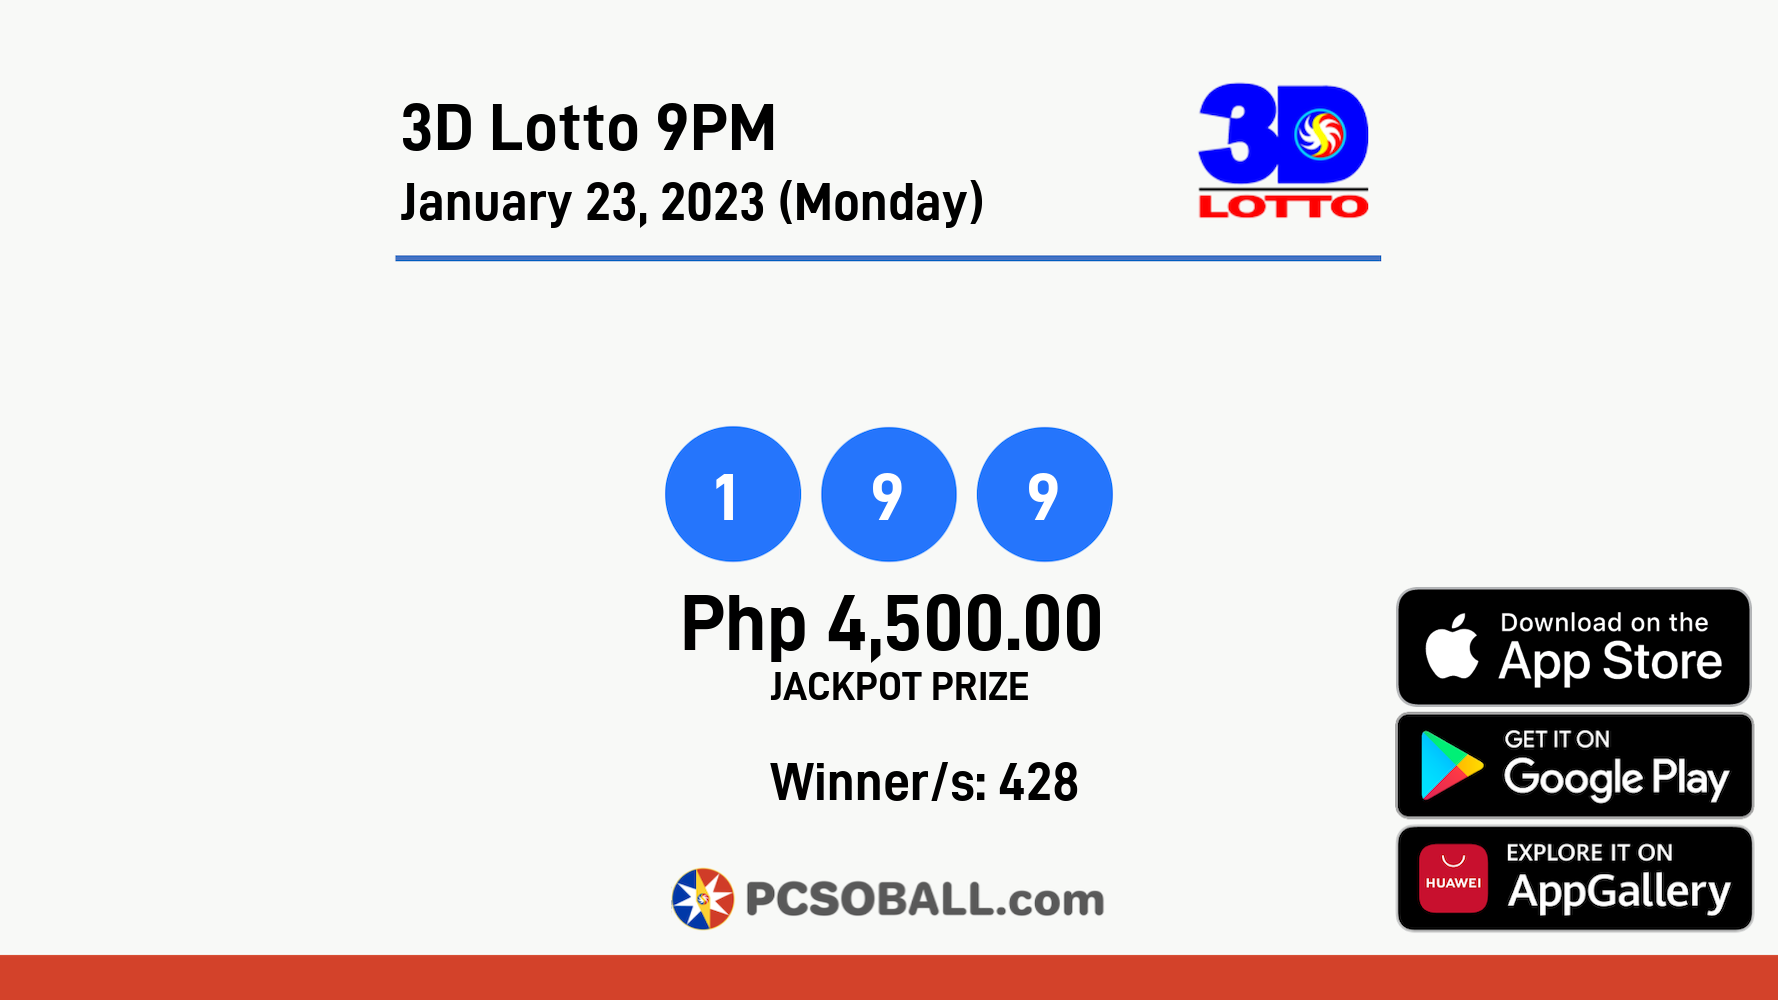 3D Lotto 9PM January 23, 2023 (Monday) Result